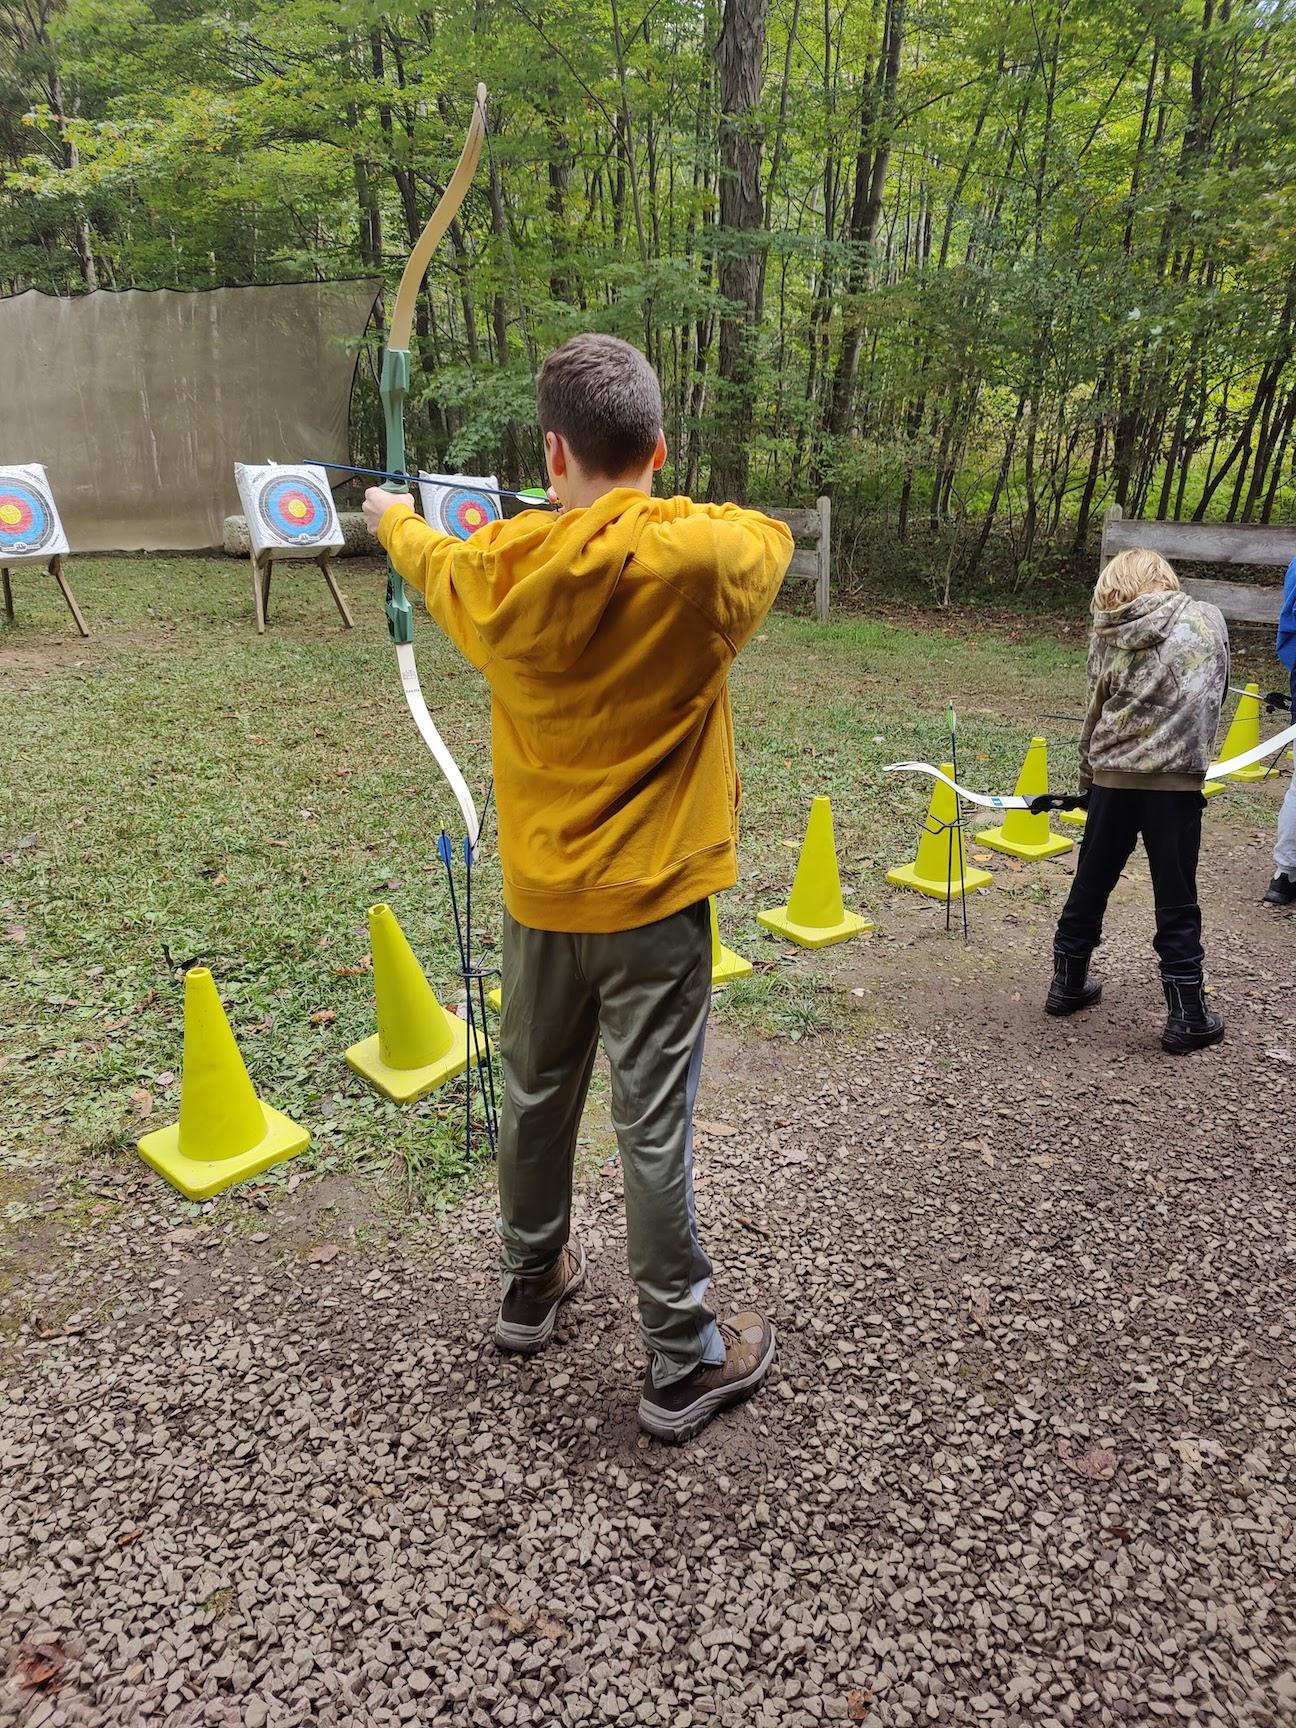 Penn Middle 6th grader, Zach Moors, spends time at the archery range